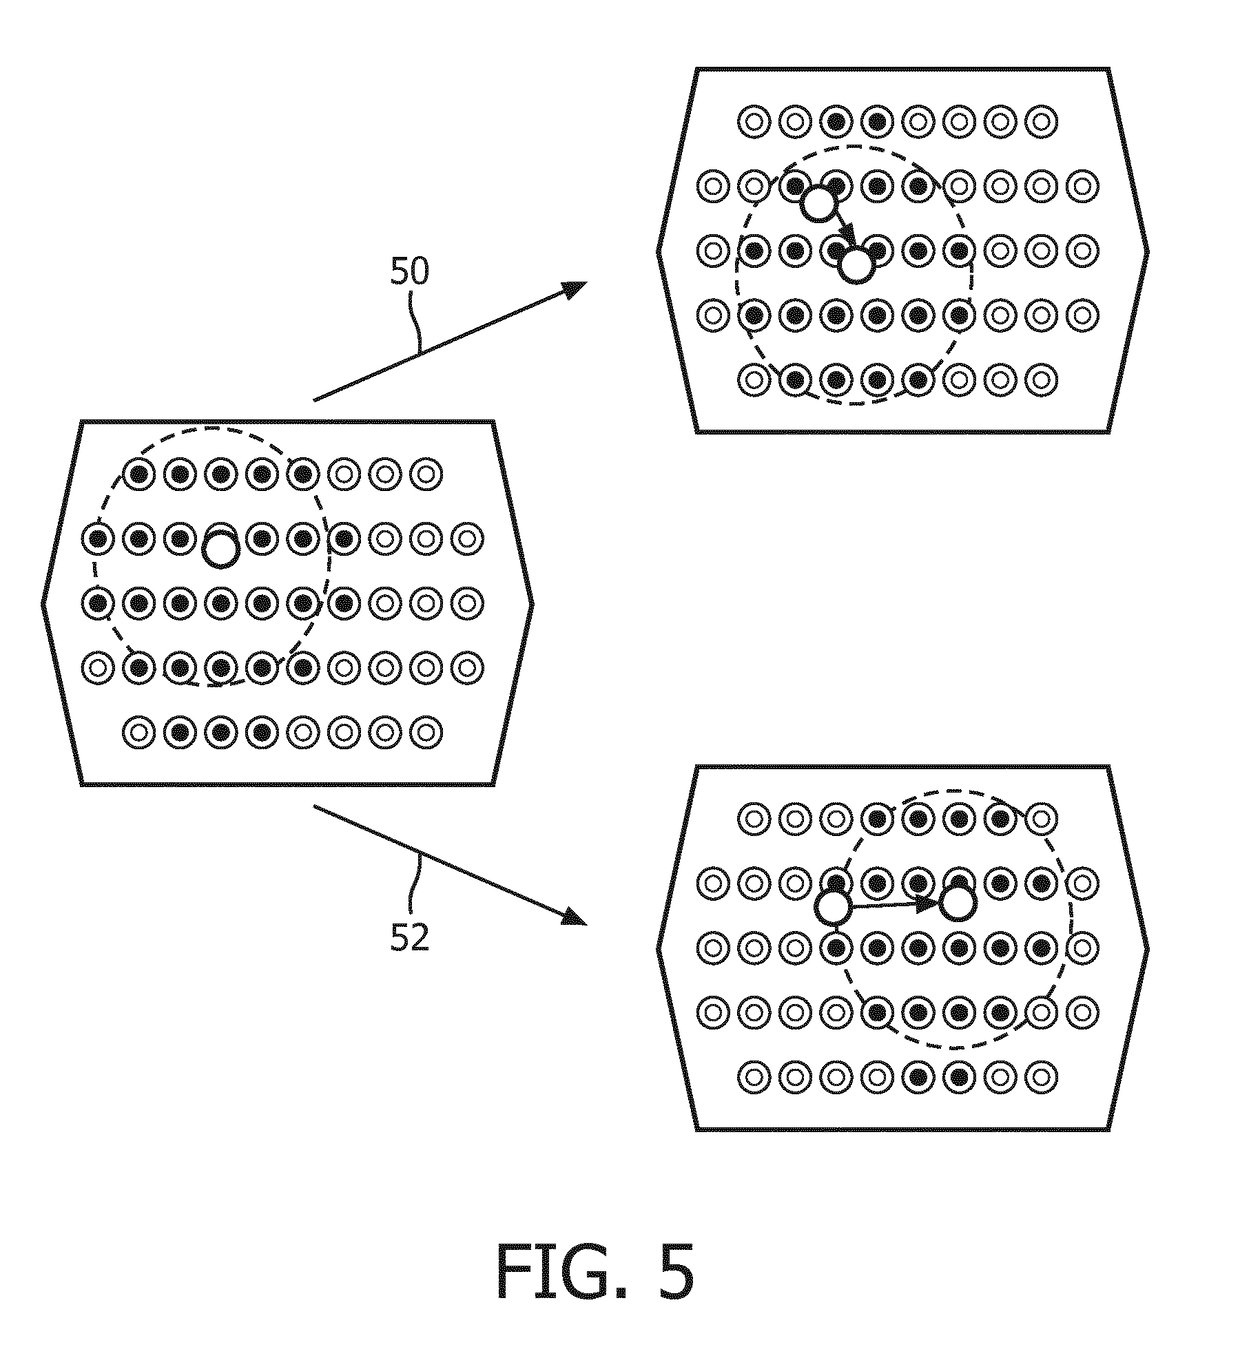 Fetal monitoring system and method